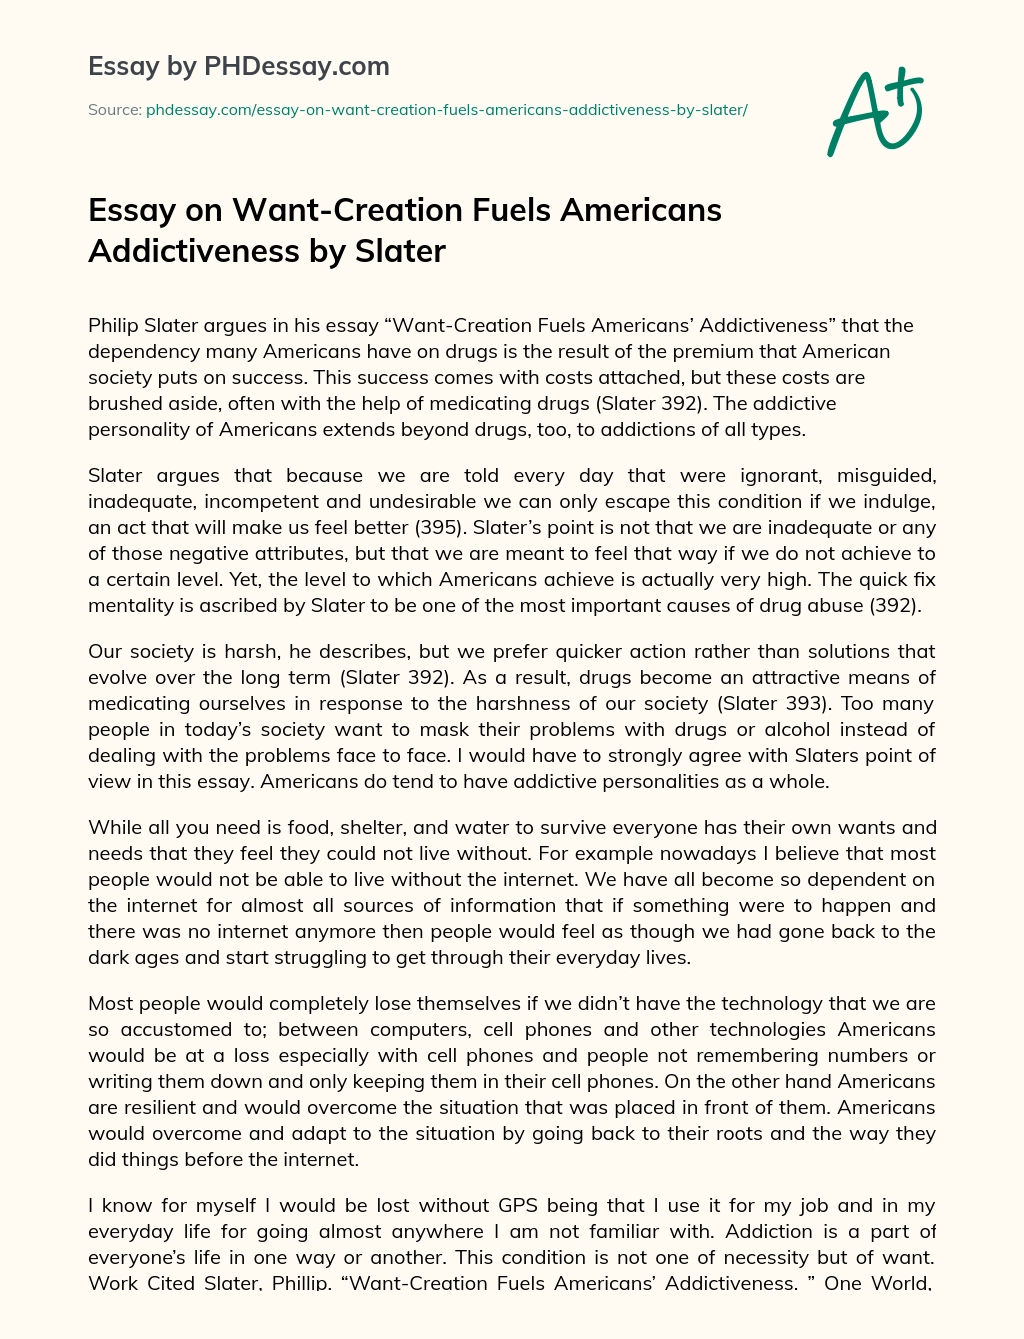 Essay on Want-Creation Fuels Americans Addictiveness by Slater essay